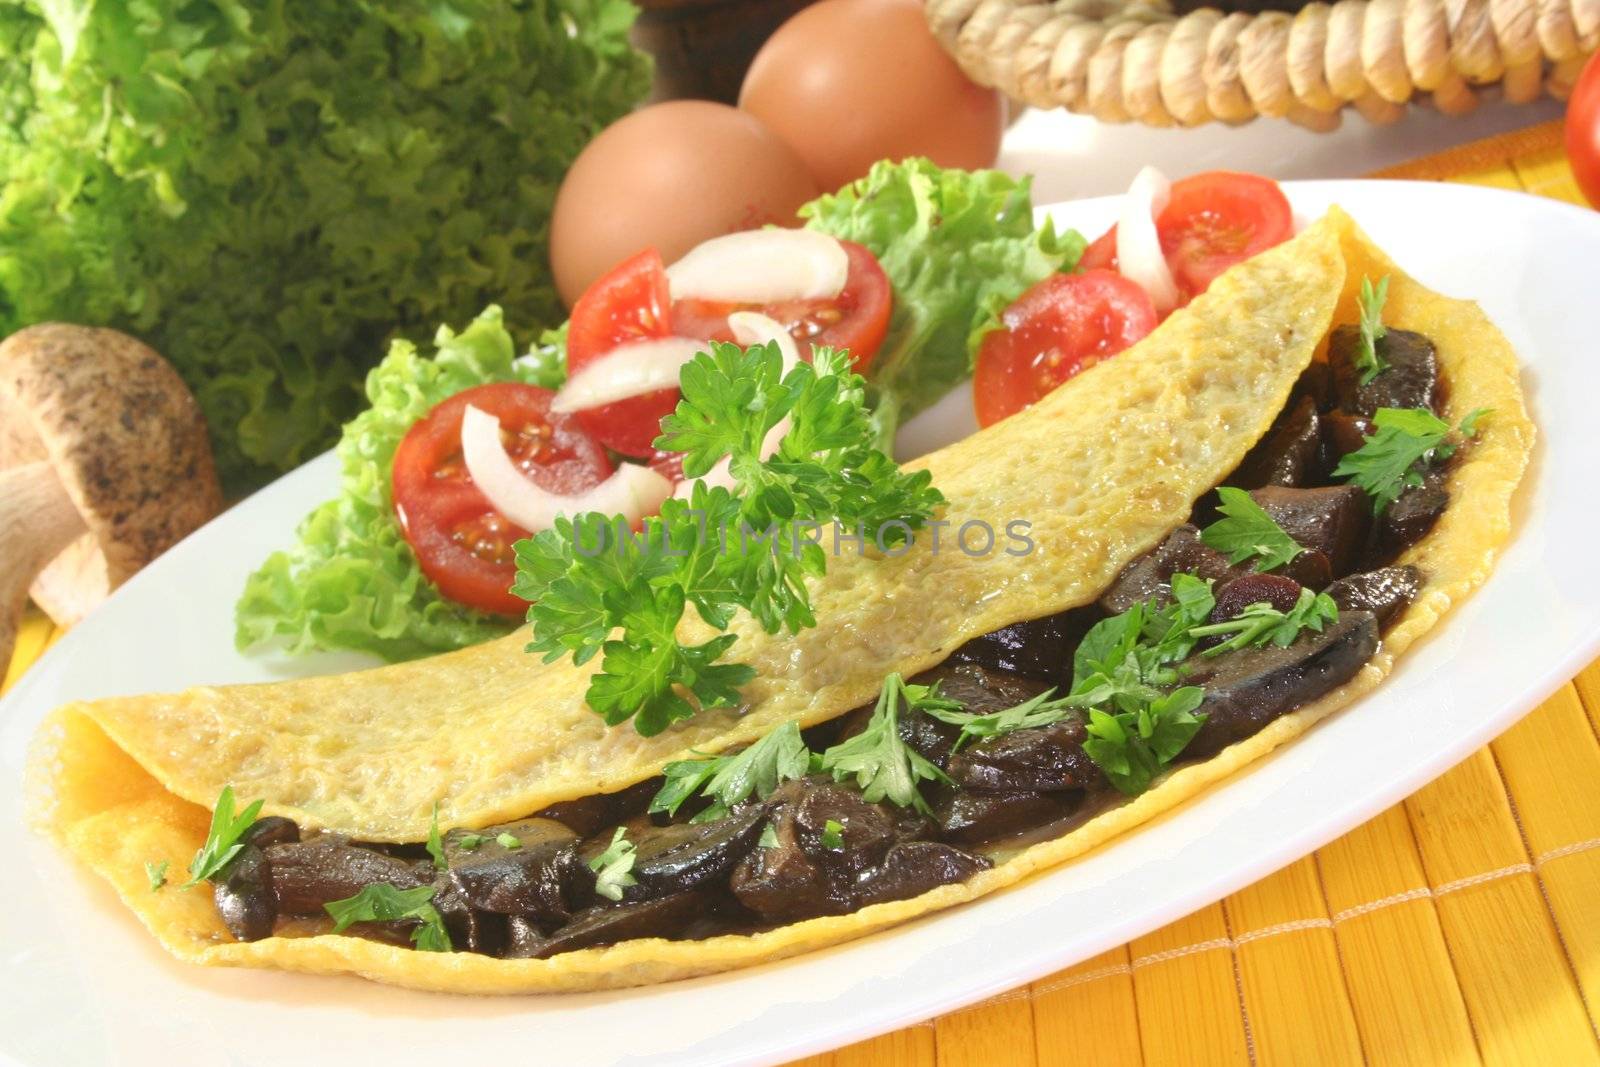 Mushroom omelet by discovery